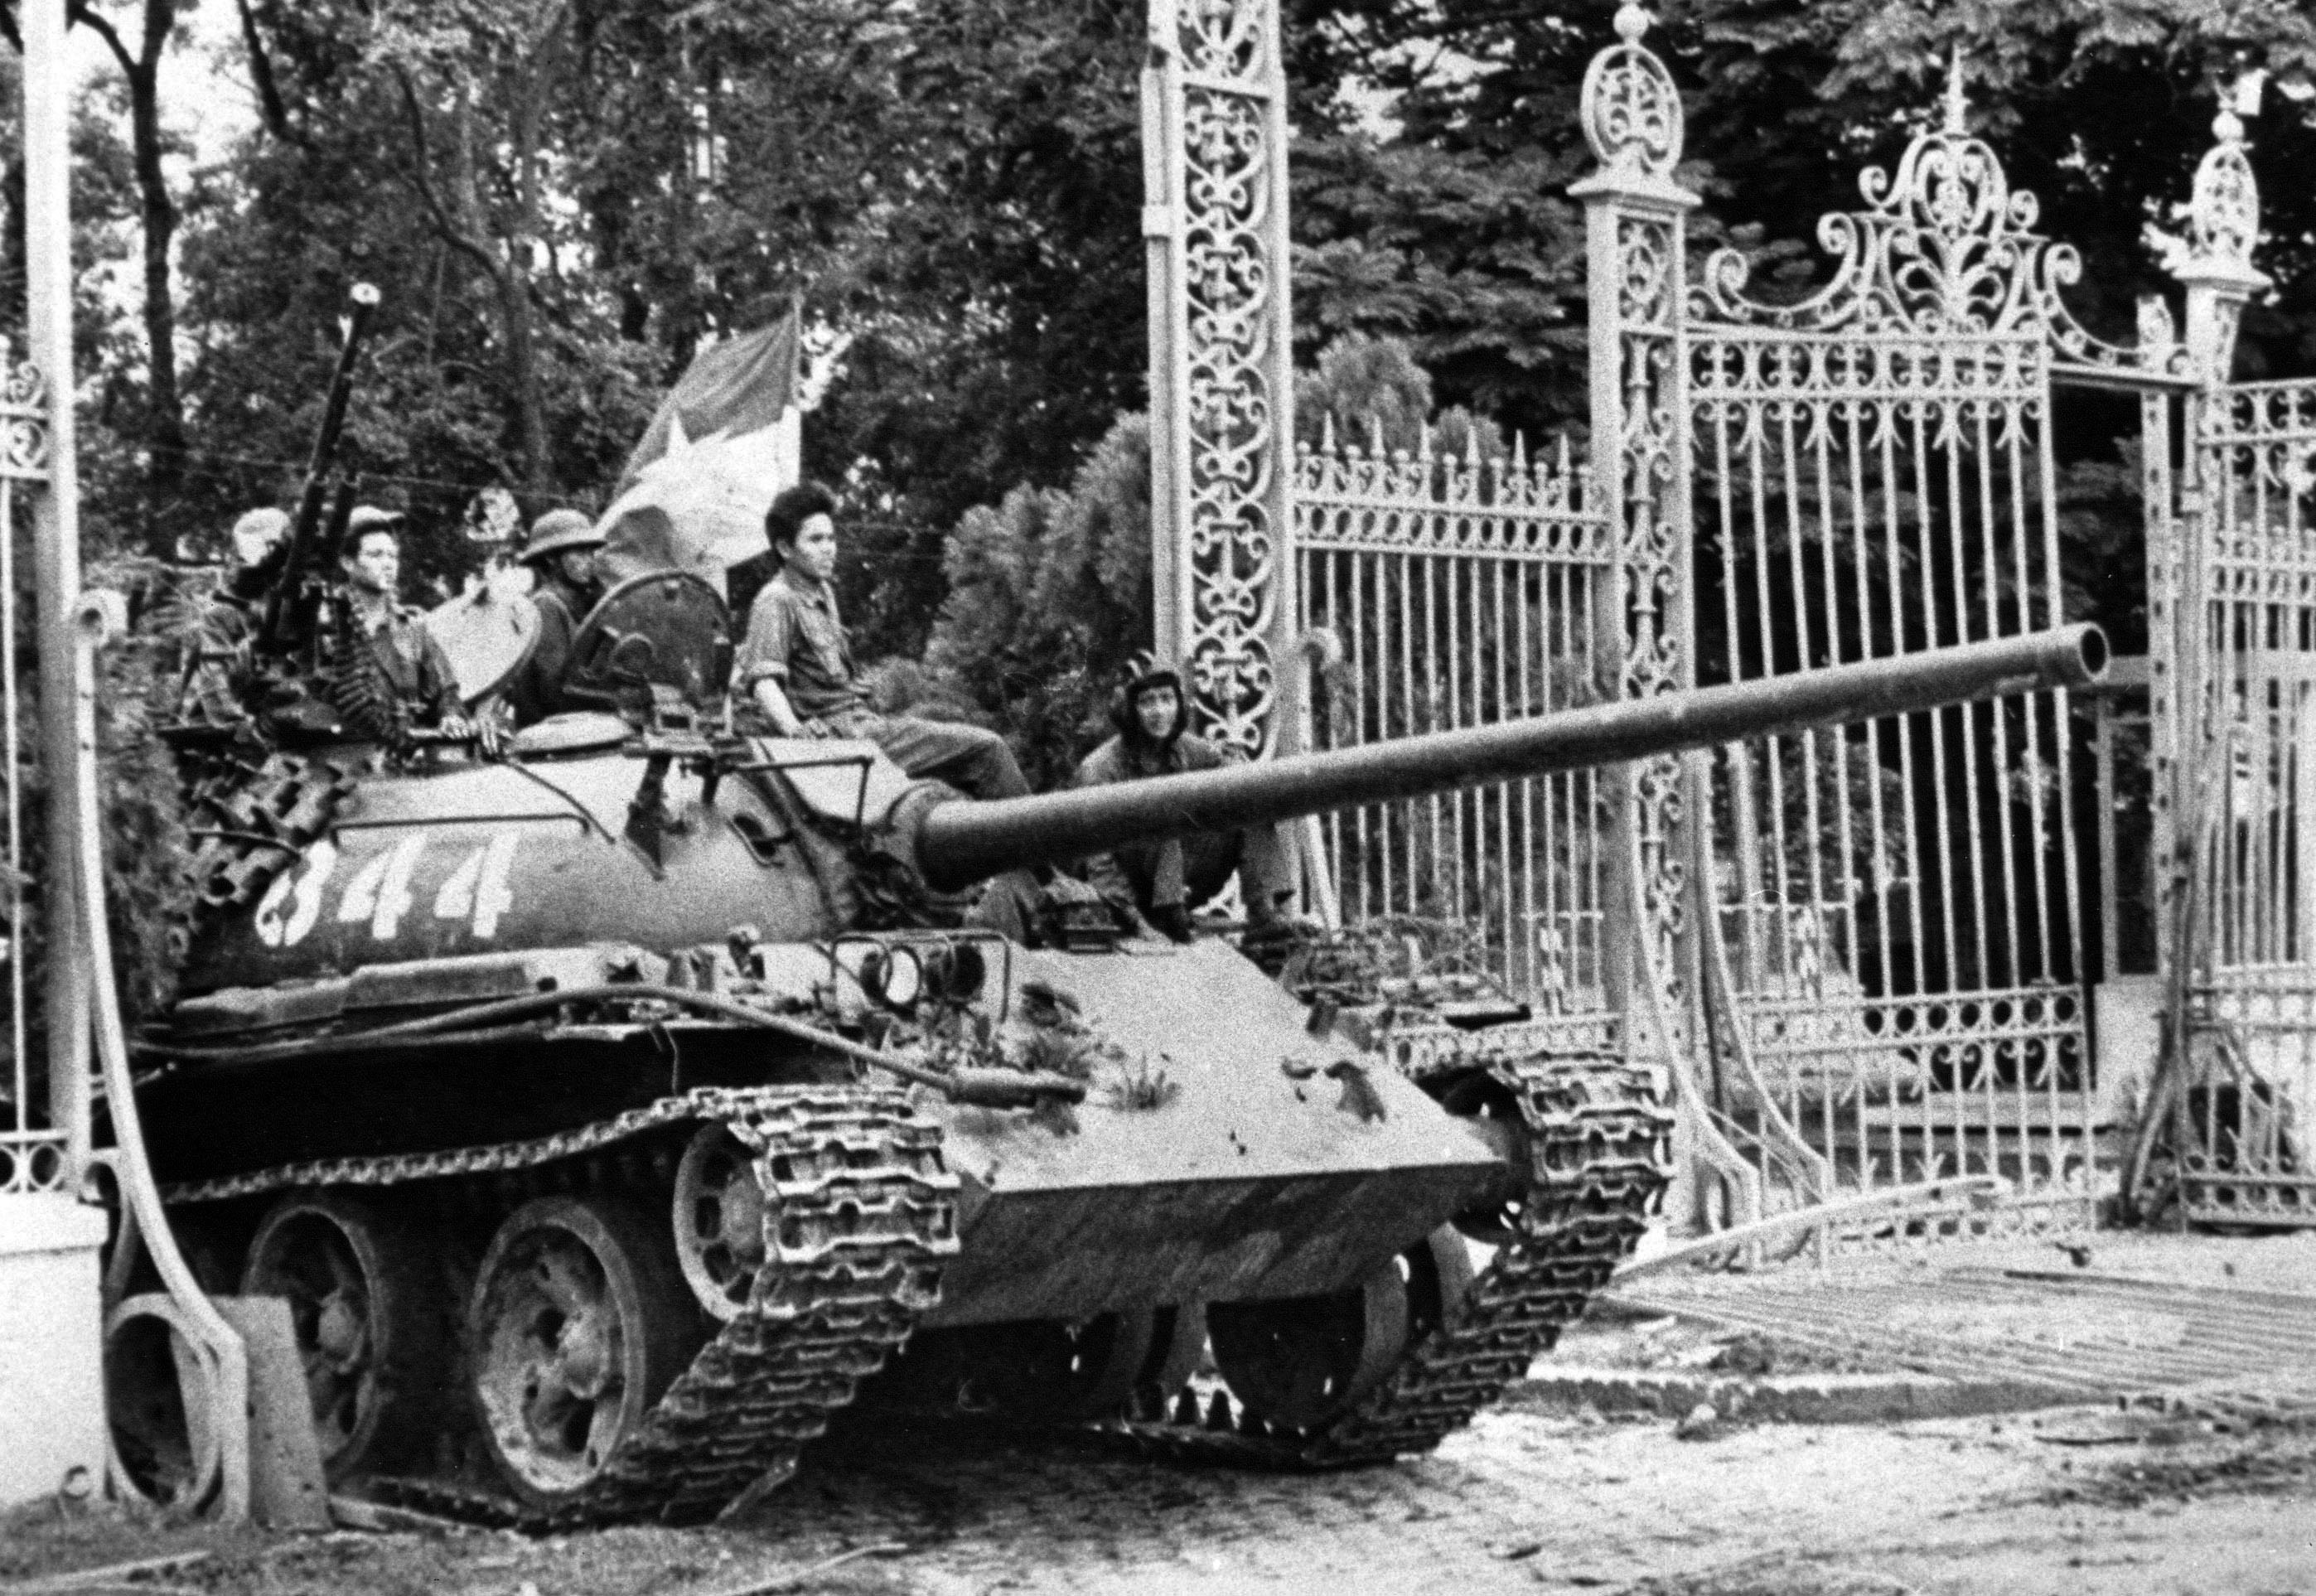 A North Vietnamese tank rolls through the gate of the Presidential Palace in Saigon, April 30, 1975, signifying the fall of South Vietnam. (AP Photo)